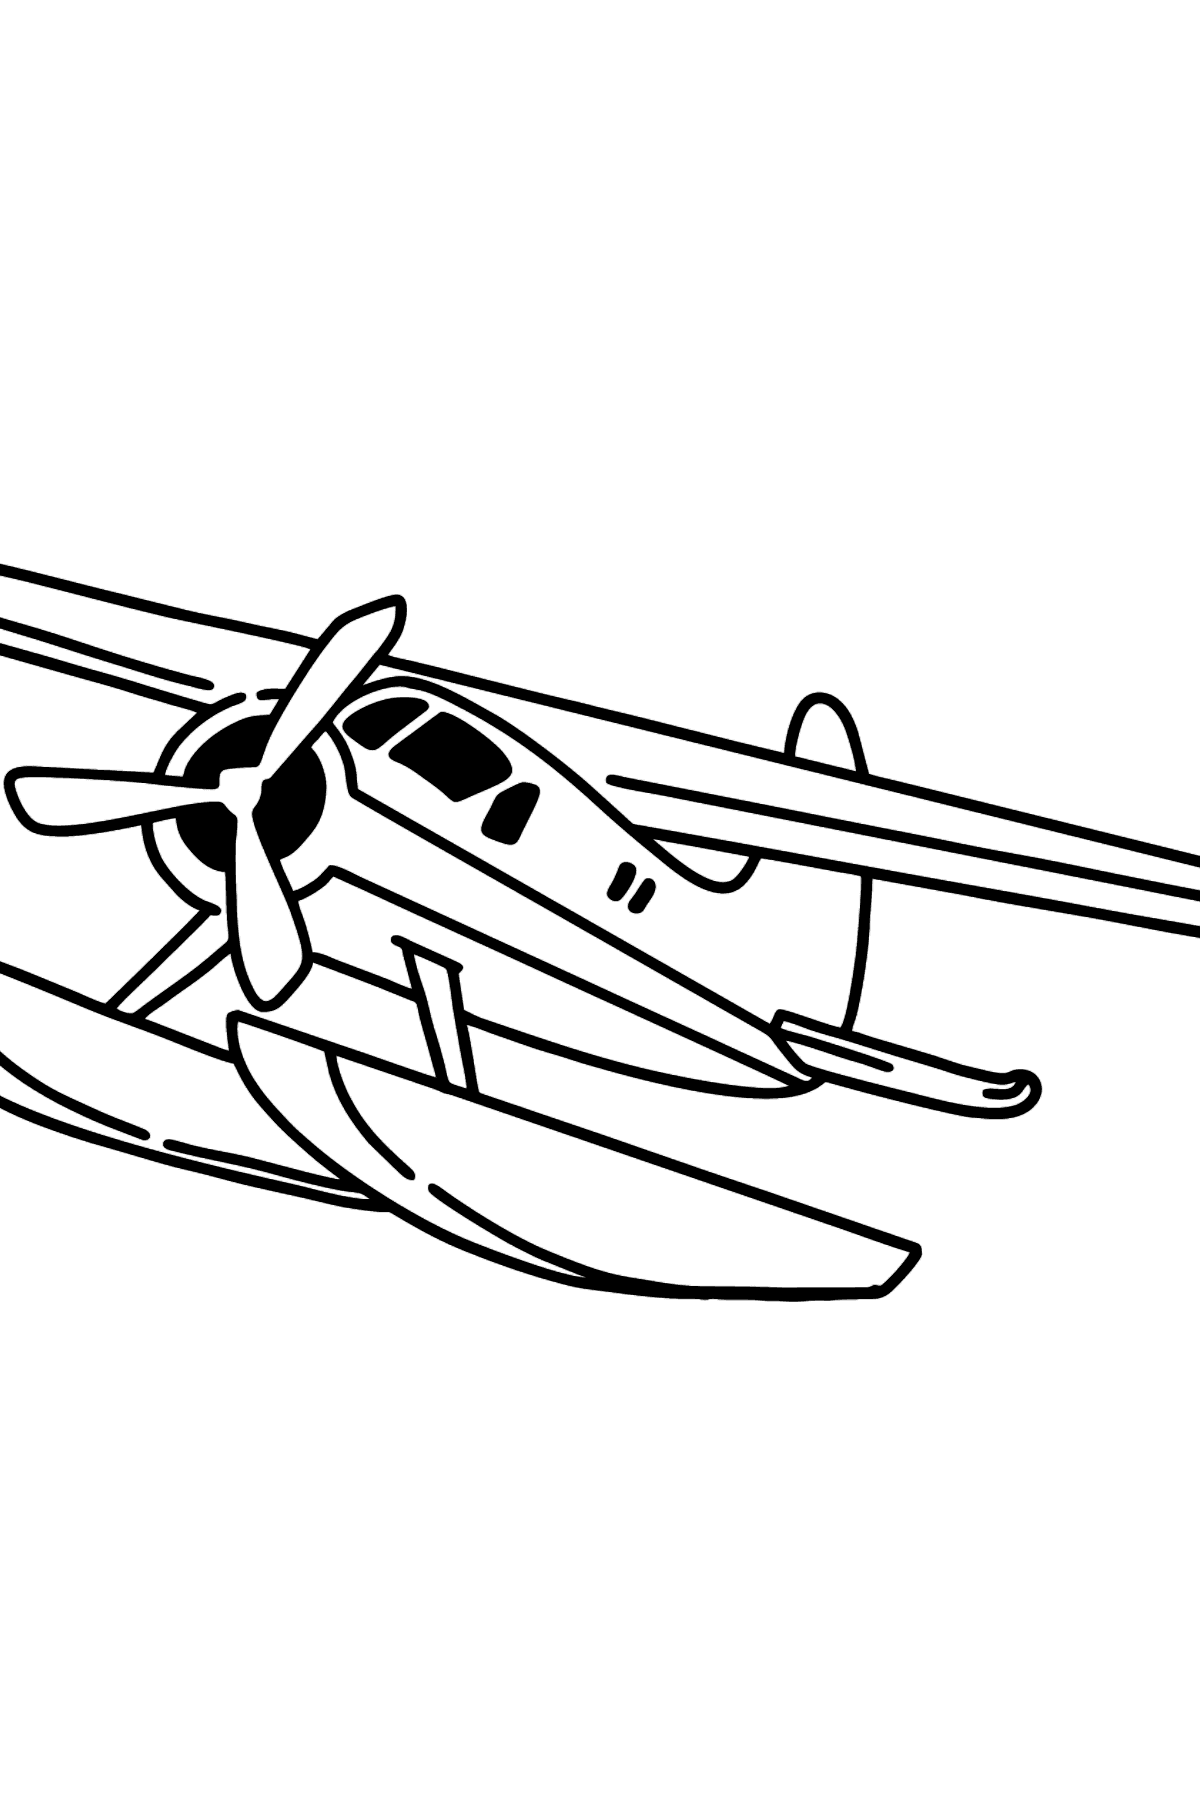 Jet Airplane BE-200 coloring page - Coloring Pages for Kids